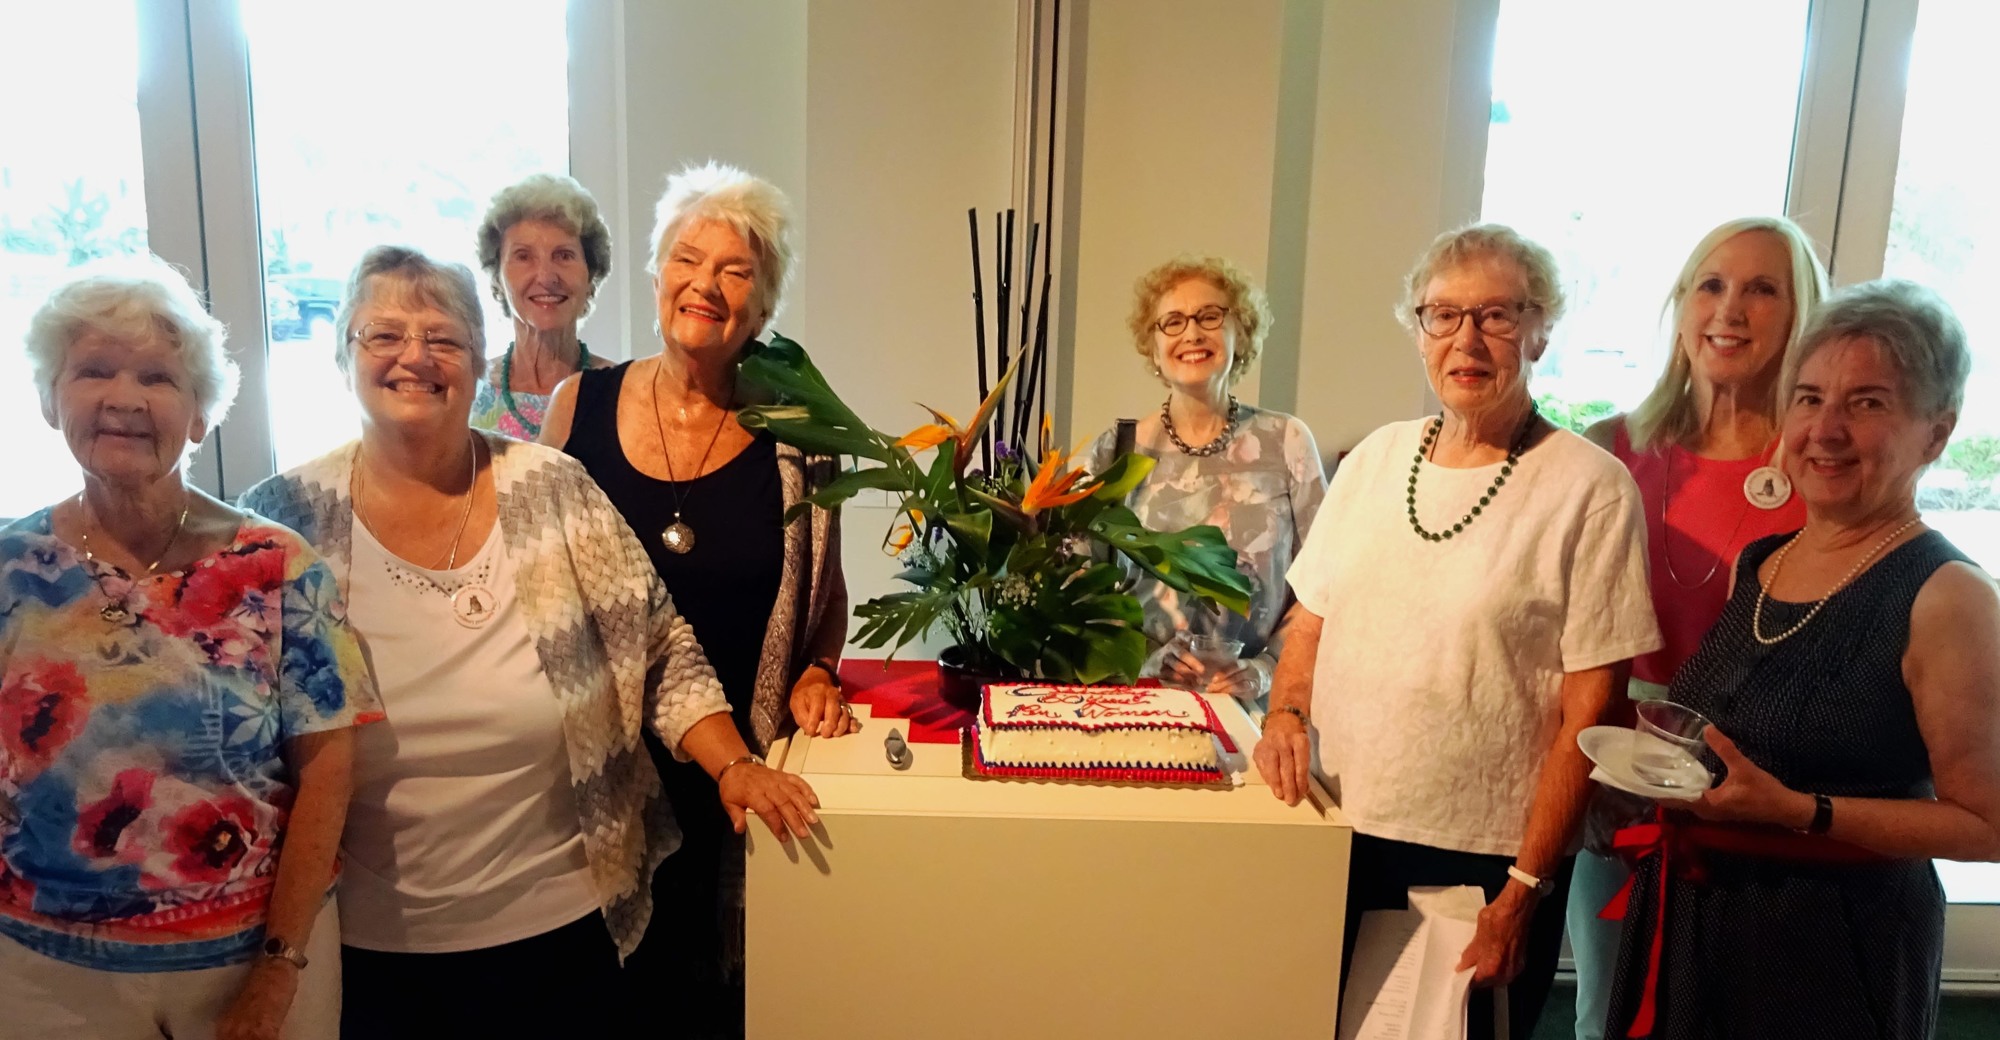 The Sarasota Pen Women held an opening reception for their exhibit at Ringling College of Art and Design on May 26. Courtesy photo